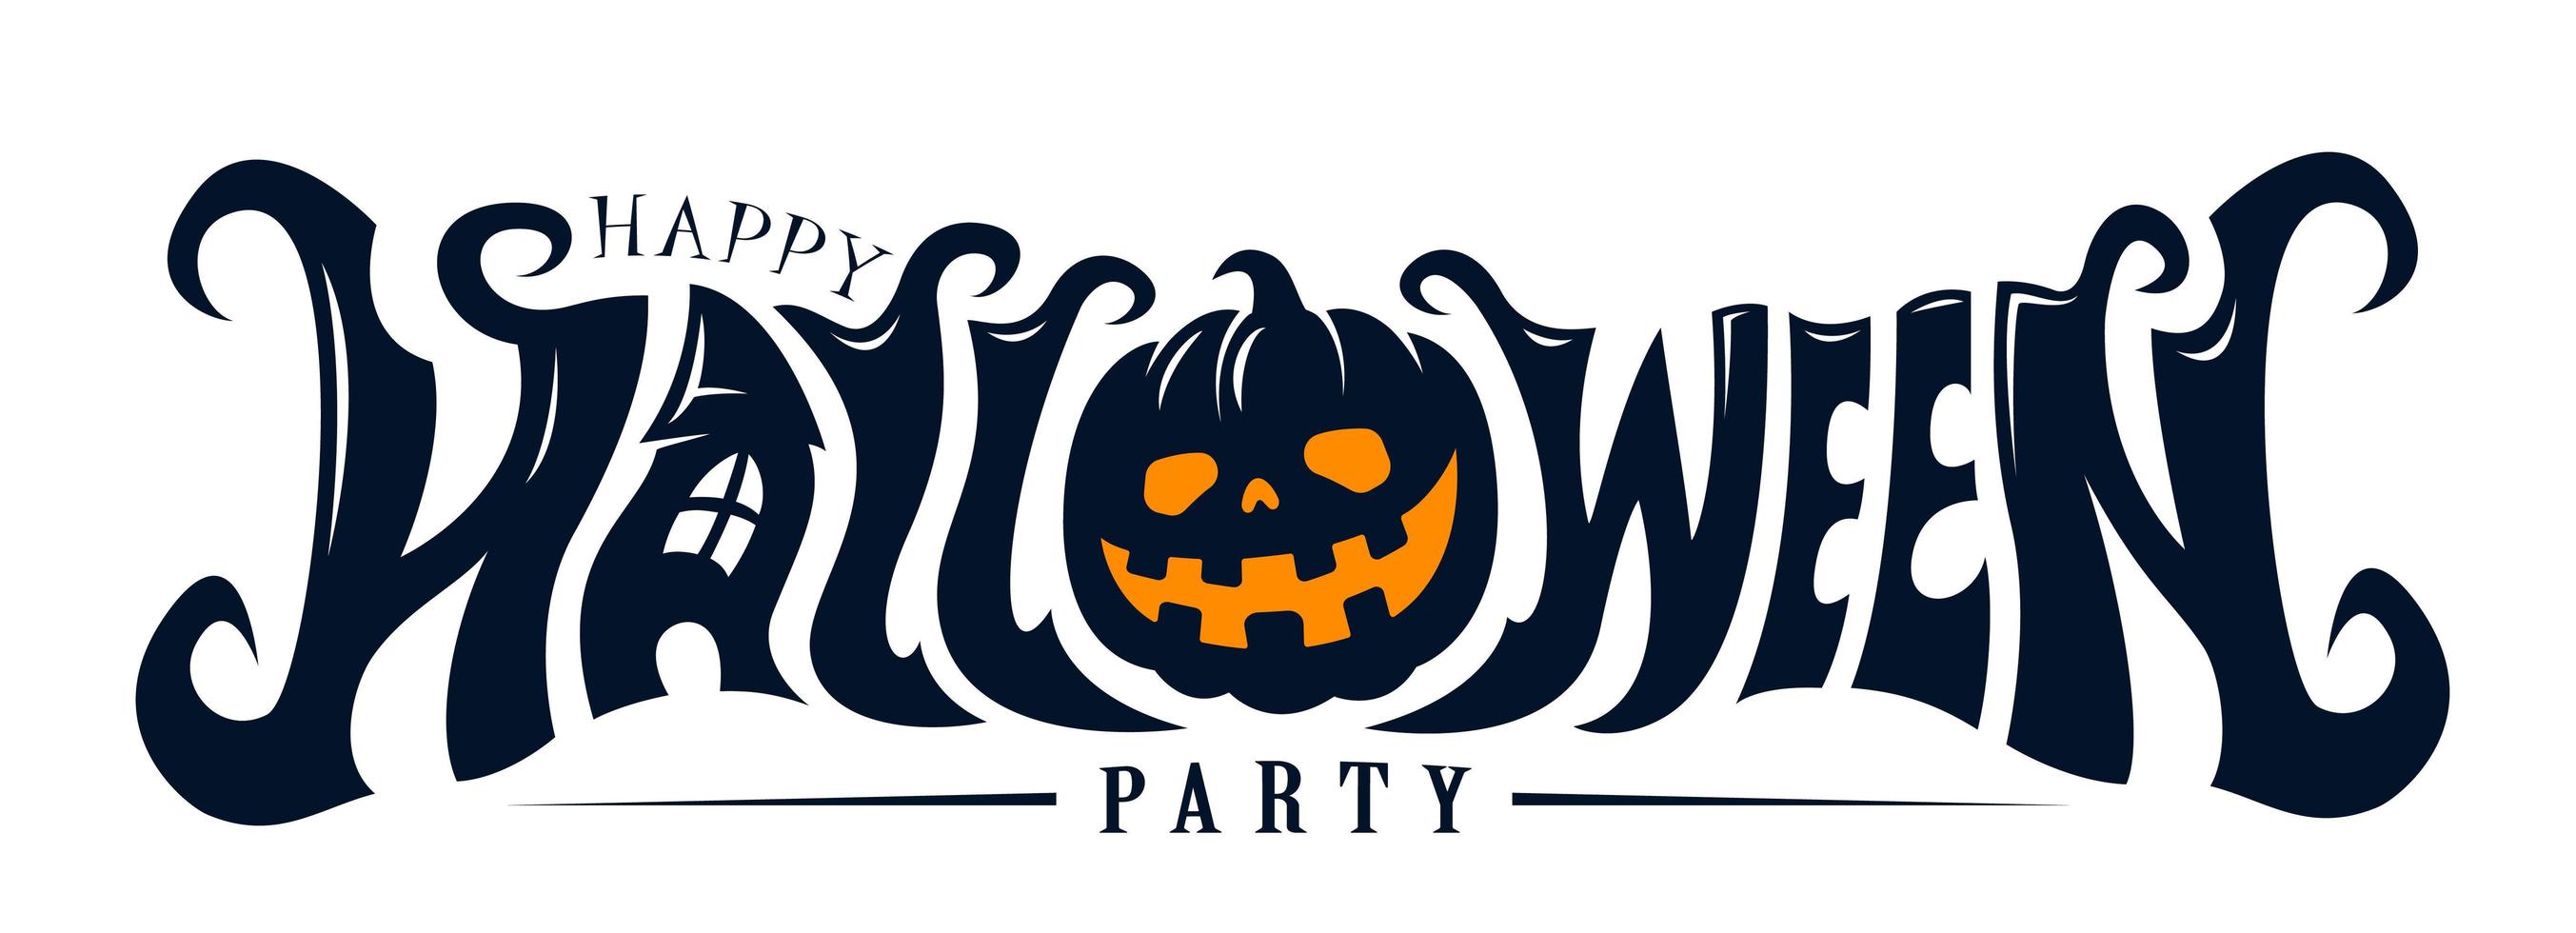 Halloween Party Svg